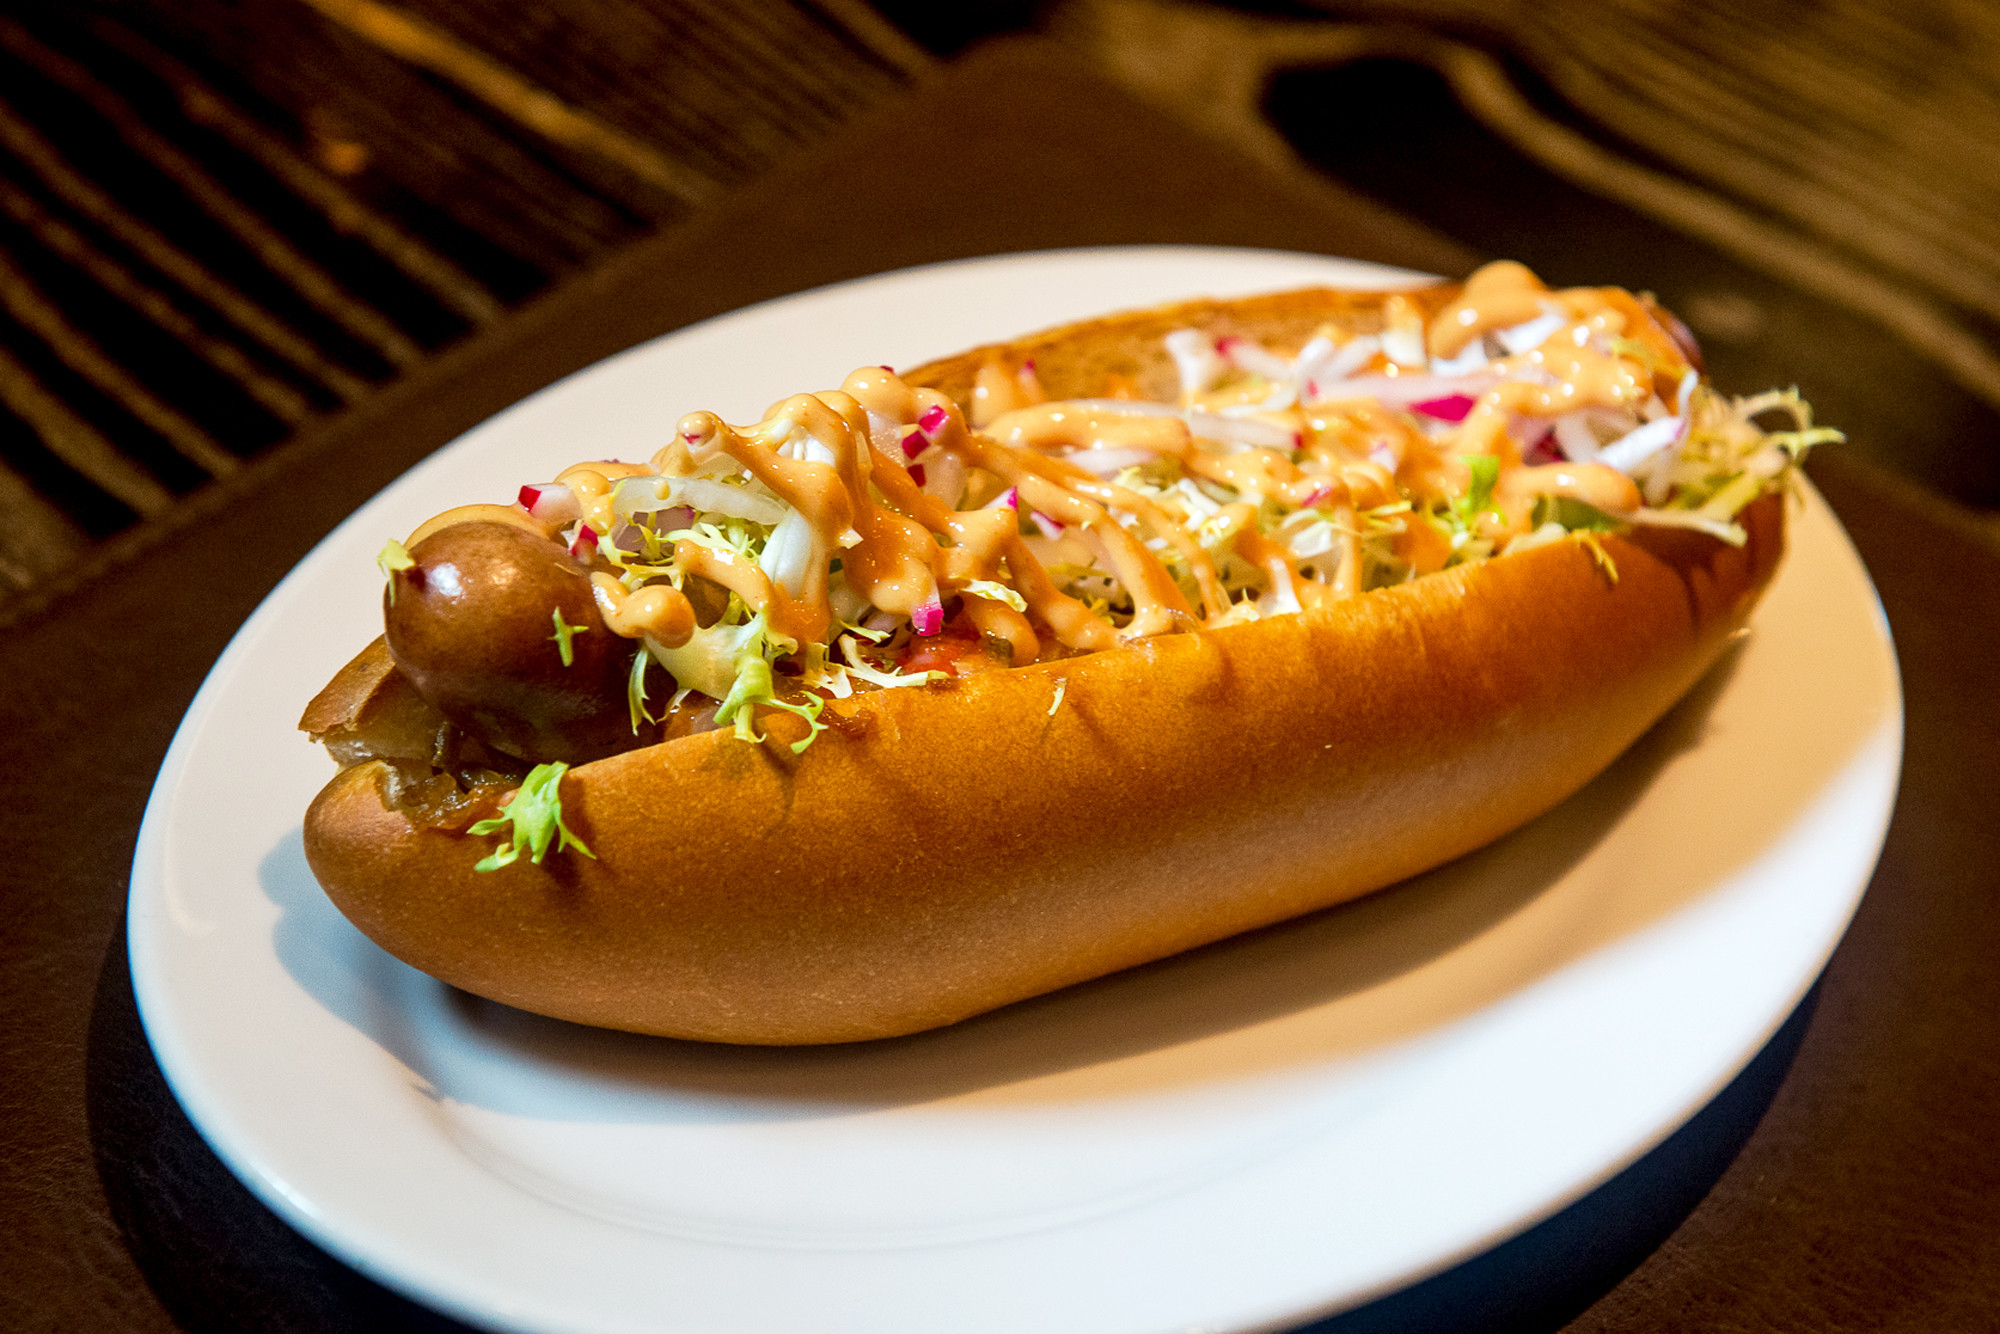 Gourmet Hot Dogs
 8 gourmet hot dogs to try in NYC this summer